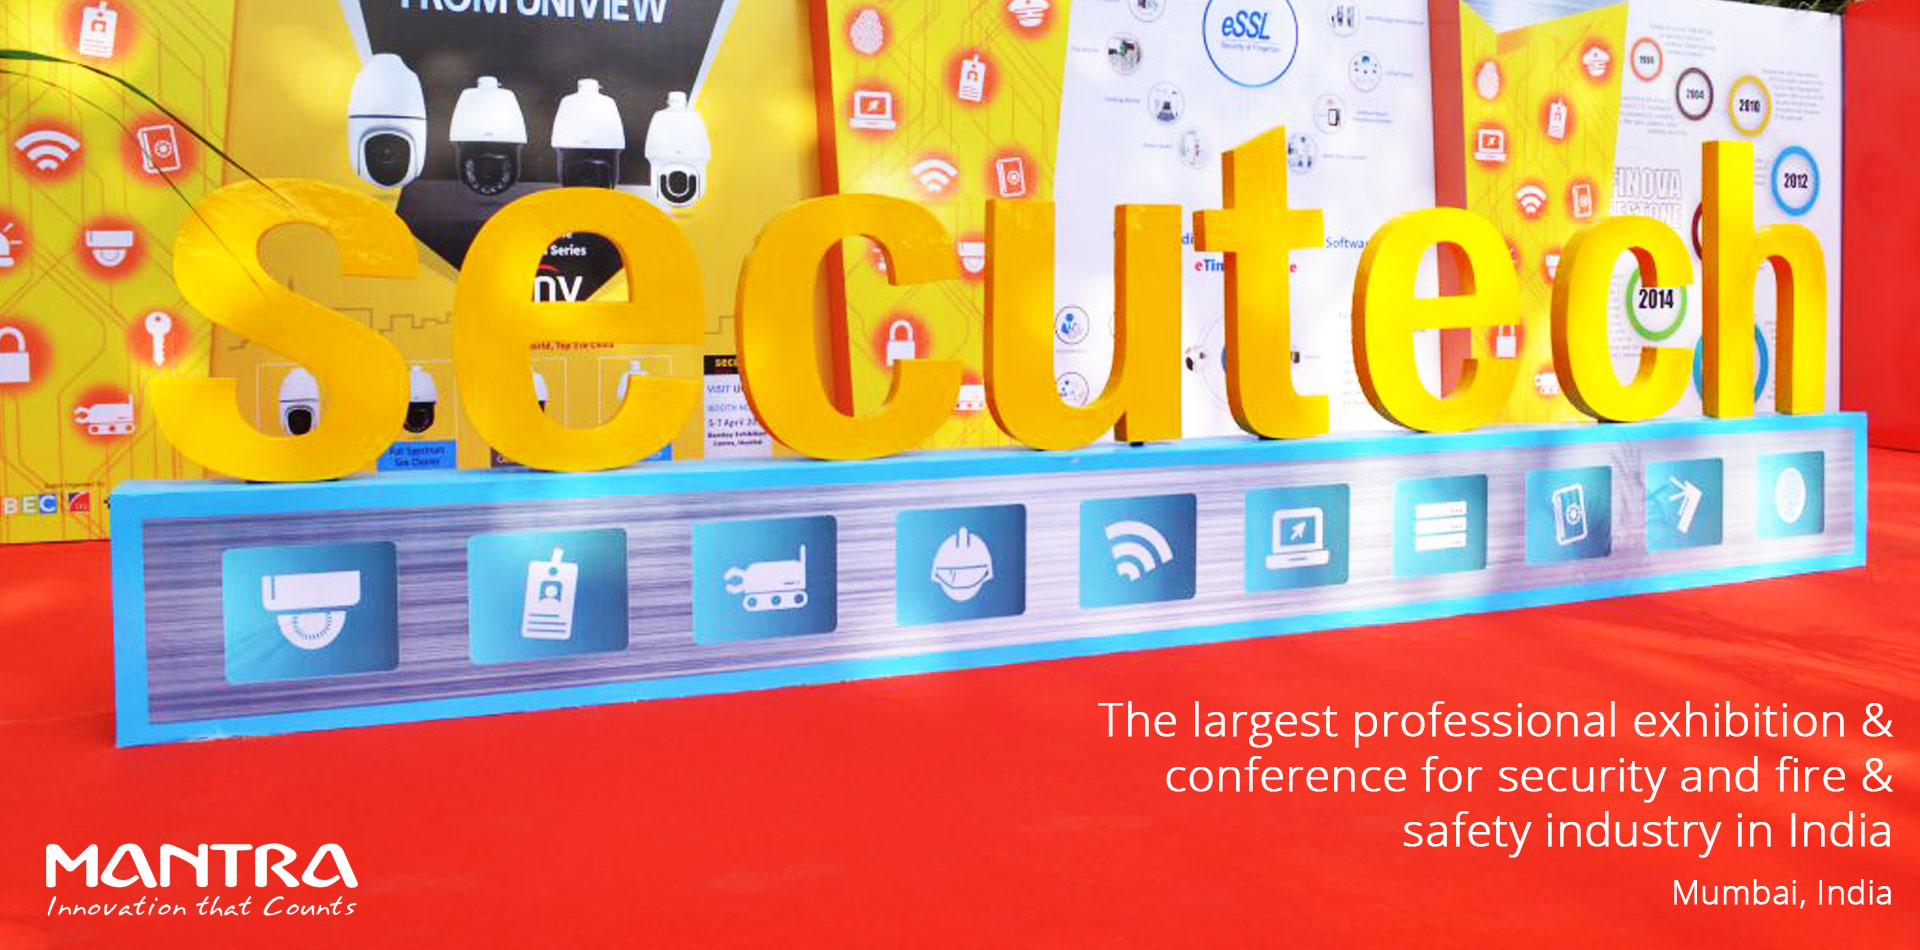 Mantra-to-showcase-the-Next-Generation-Biometric-Security-Products-and-Solutions-at-Secutech-India-2019